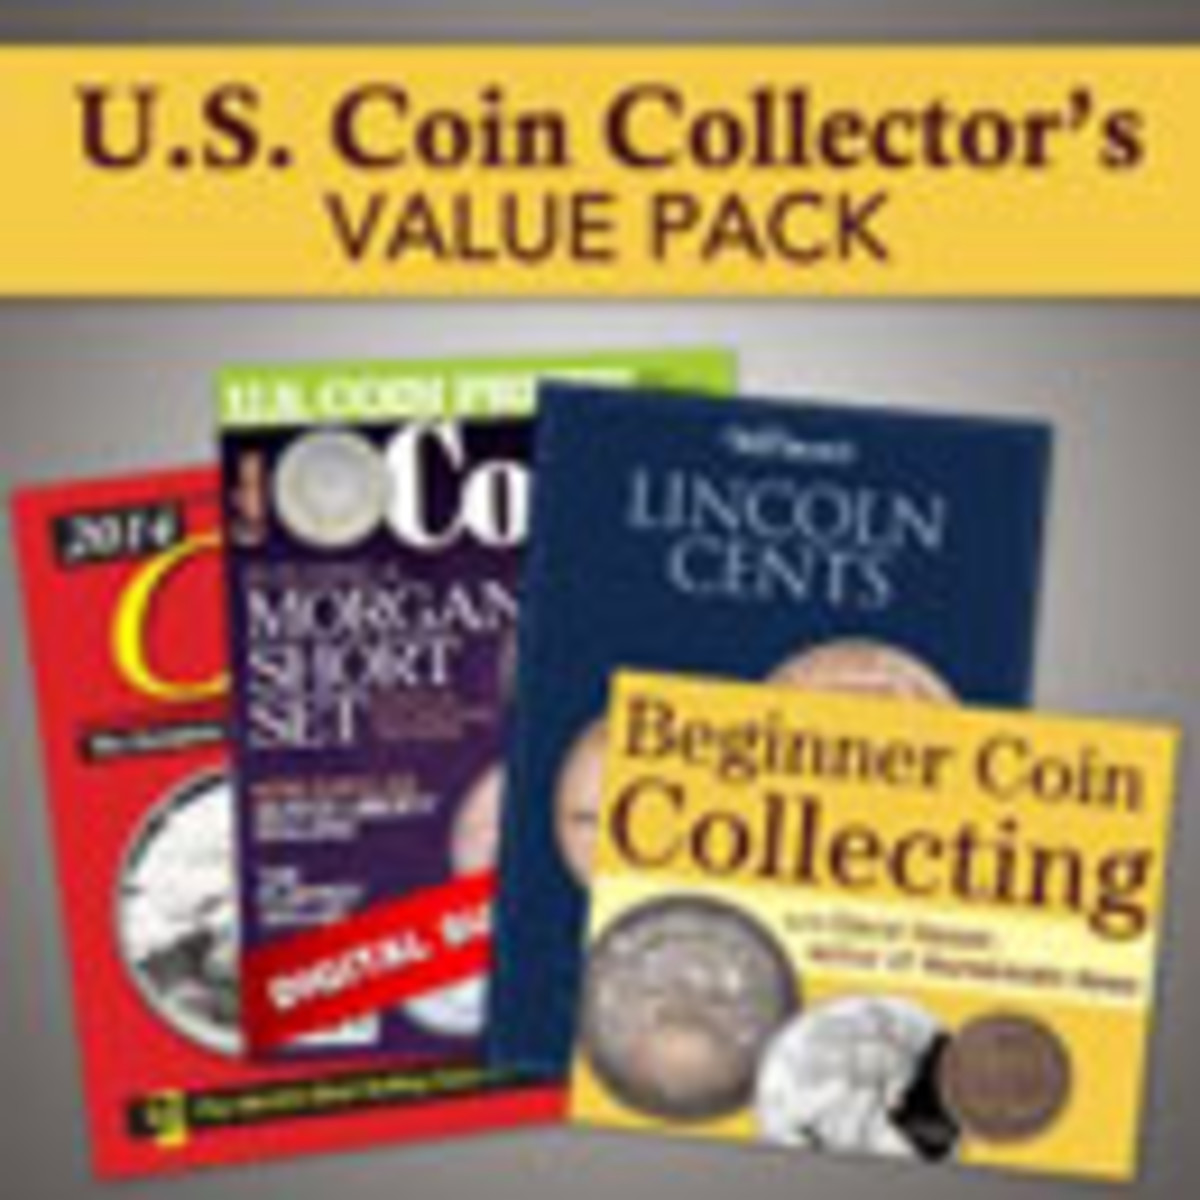 U.S. Coin Collector's Value Pack